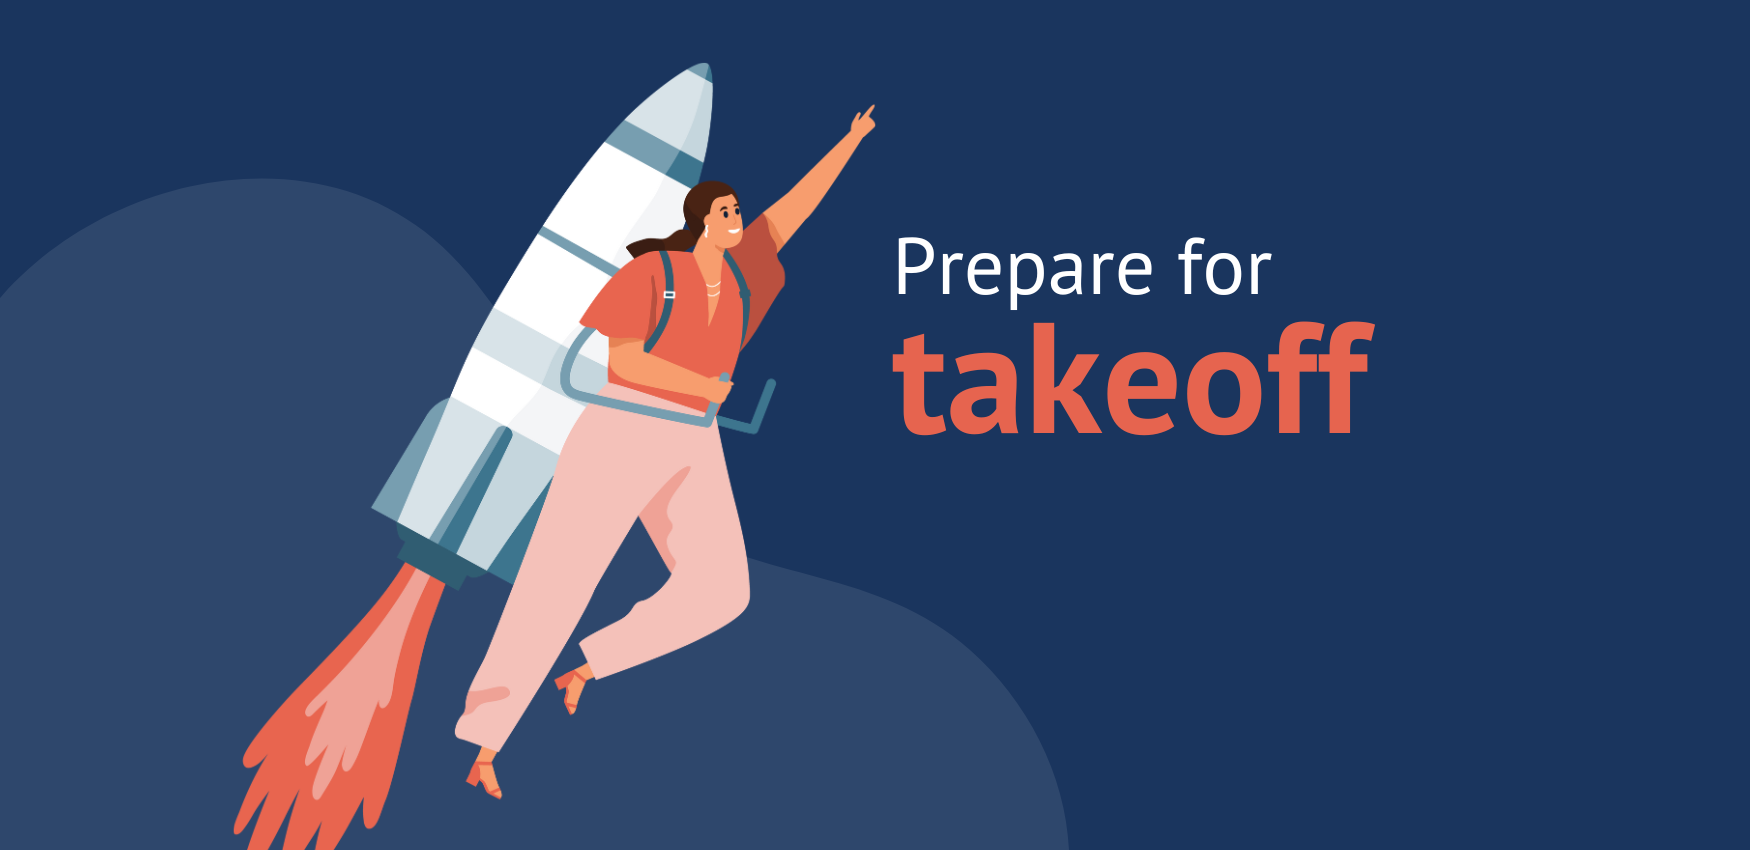 Implementation 3 Steps to Prepare for Takeoff